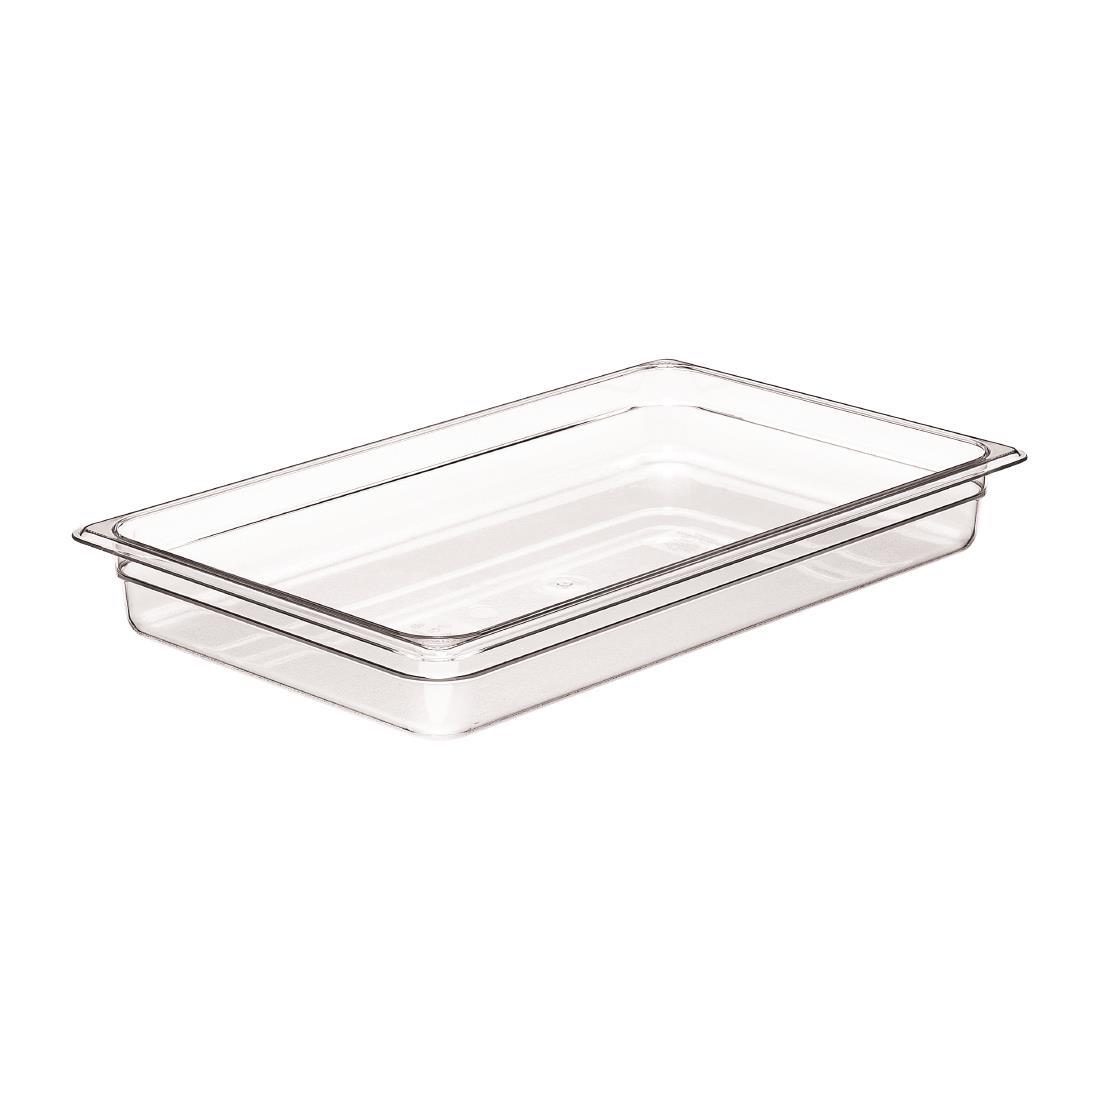 Cambro Polycarbonate 1/1 Gastronorm Pan 65mm - DM740  - 1